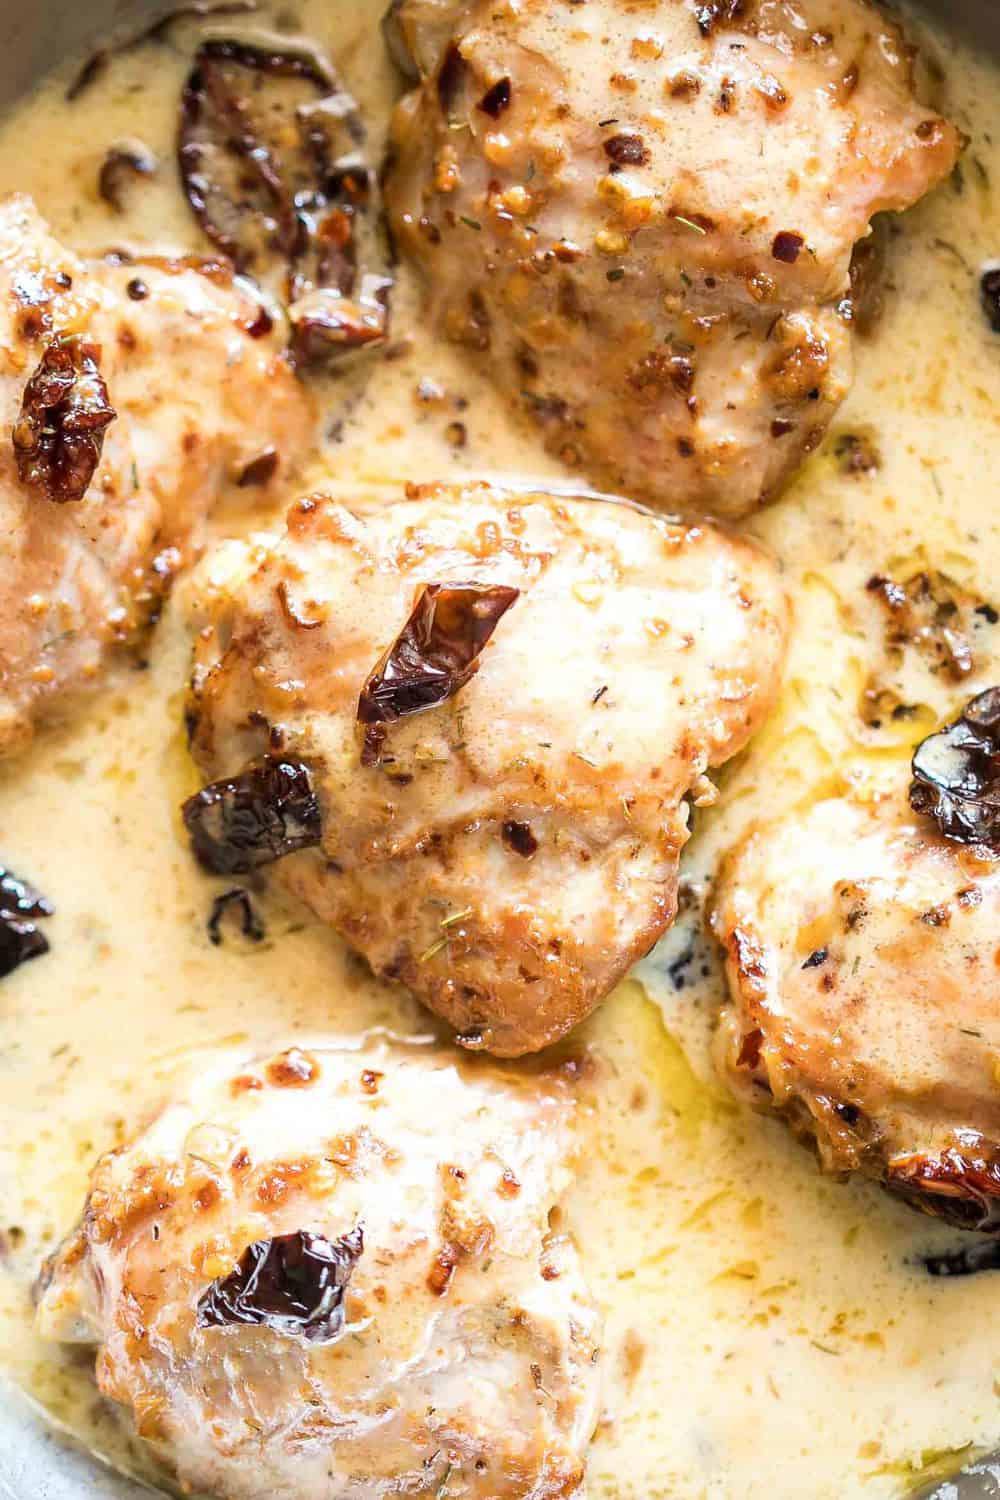 Creamy sun-dried tomato chicken with pasta is a quick, easy dinner recipe with a delicious sauce that will have you licking your fingers! I love serving this with pasta but brown rice or quinoa also work well. The whole family will love this meal!